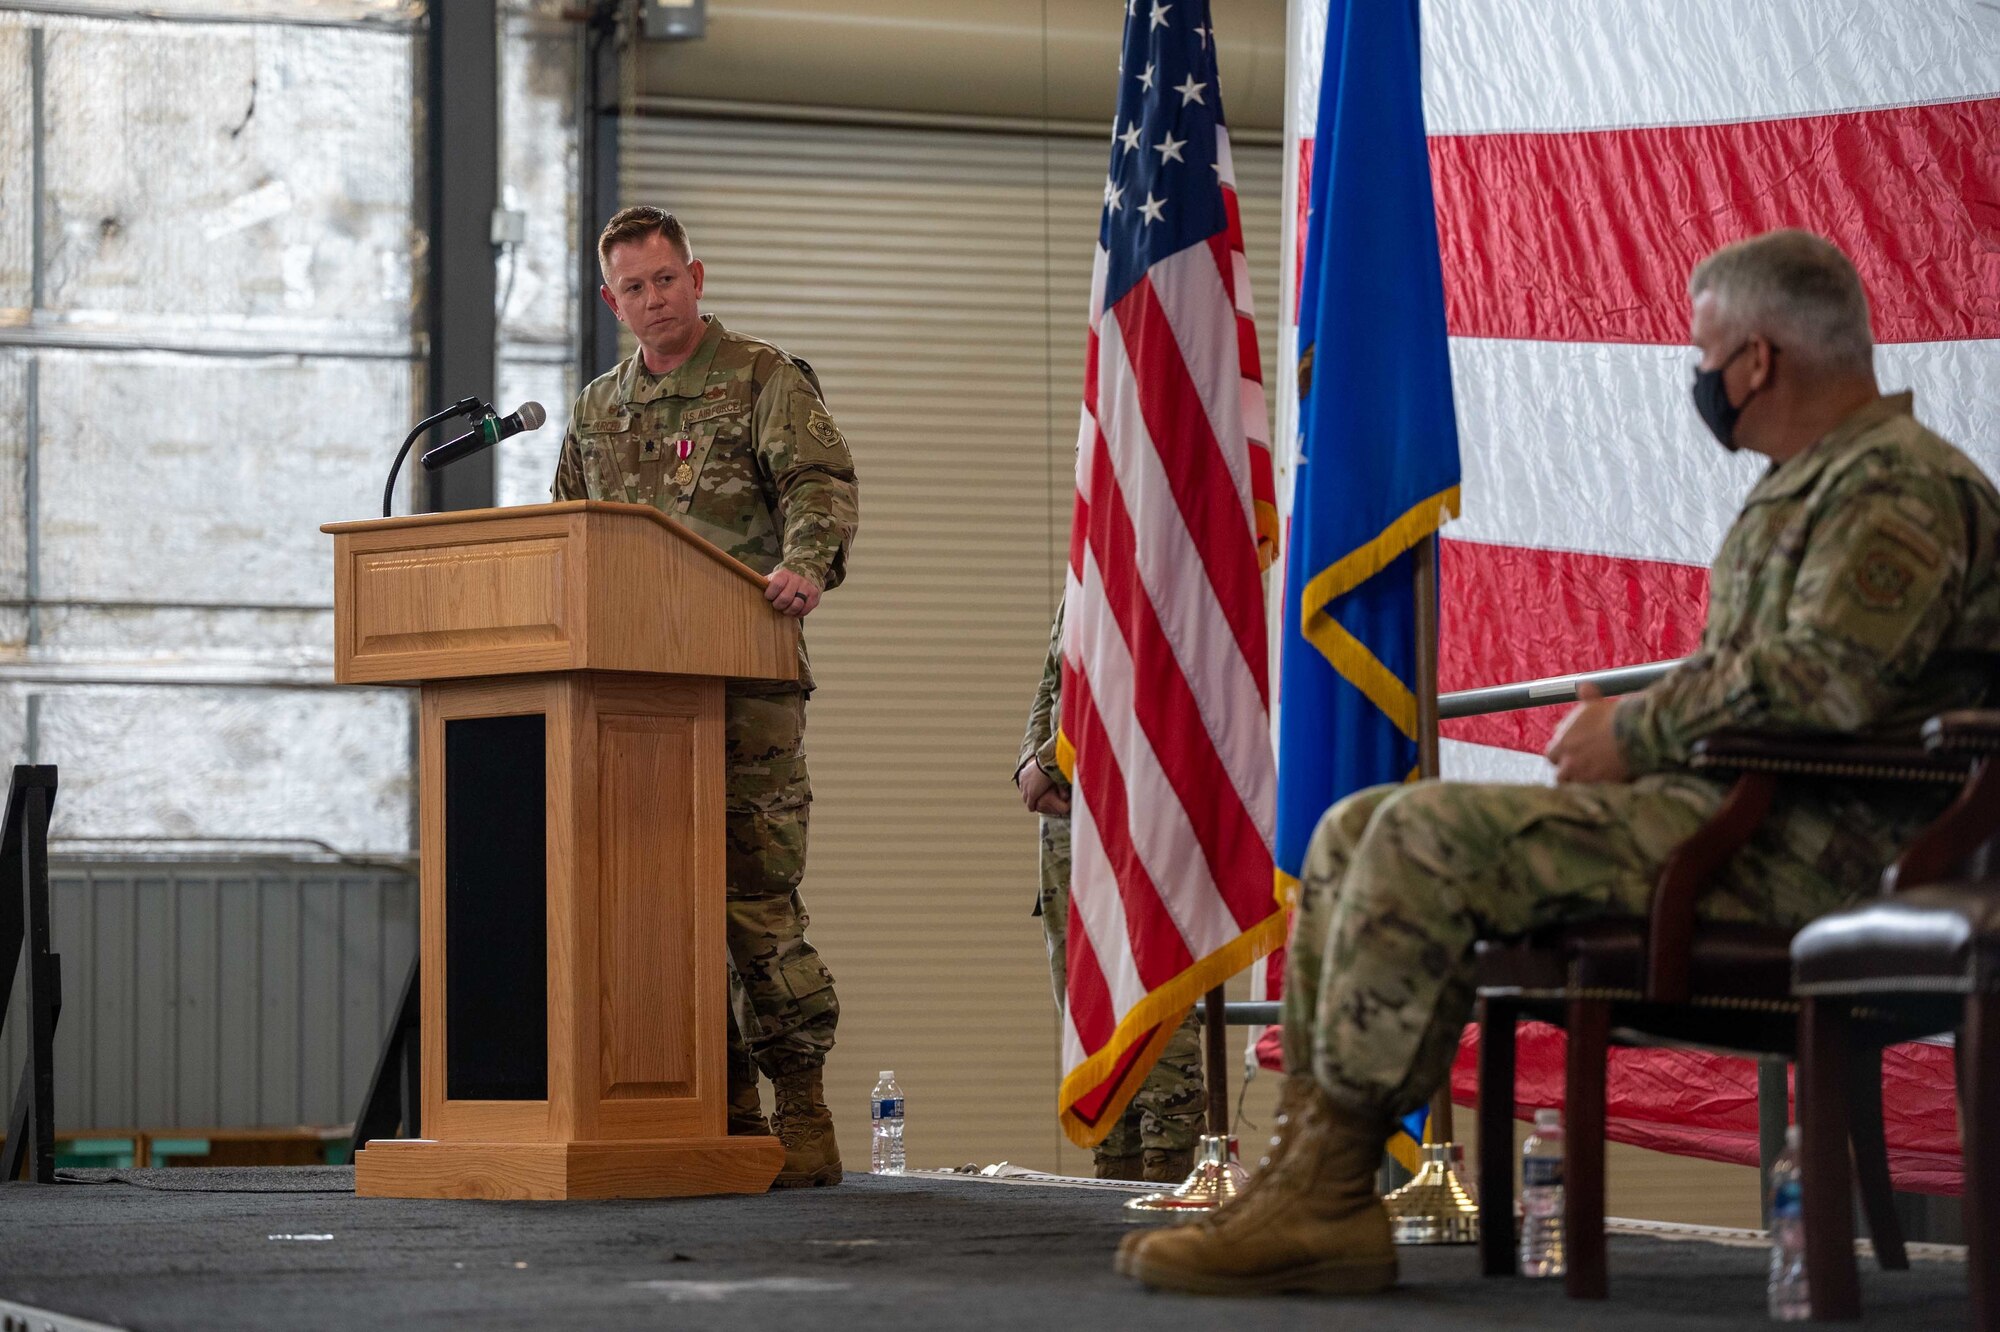 Lt. Col. Jason Purcell, outgoing 436th Aircraft Maintenance Squadron commander, speaks at the 436th AMXS change of command on Dover Air Force Base, Delaware, May 7, 2021. During the ceremony, Purcell relinquished command to Lt. Col. Josephine Beacham. (U.S. Air Force photo by Airman 1st Class Faith Schaefer)